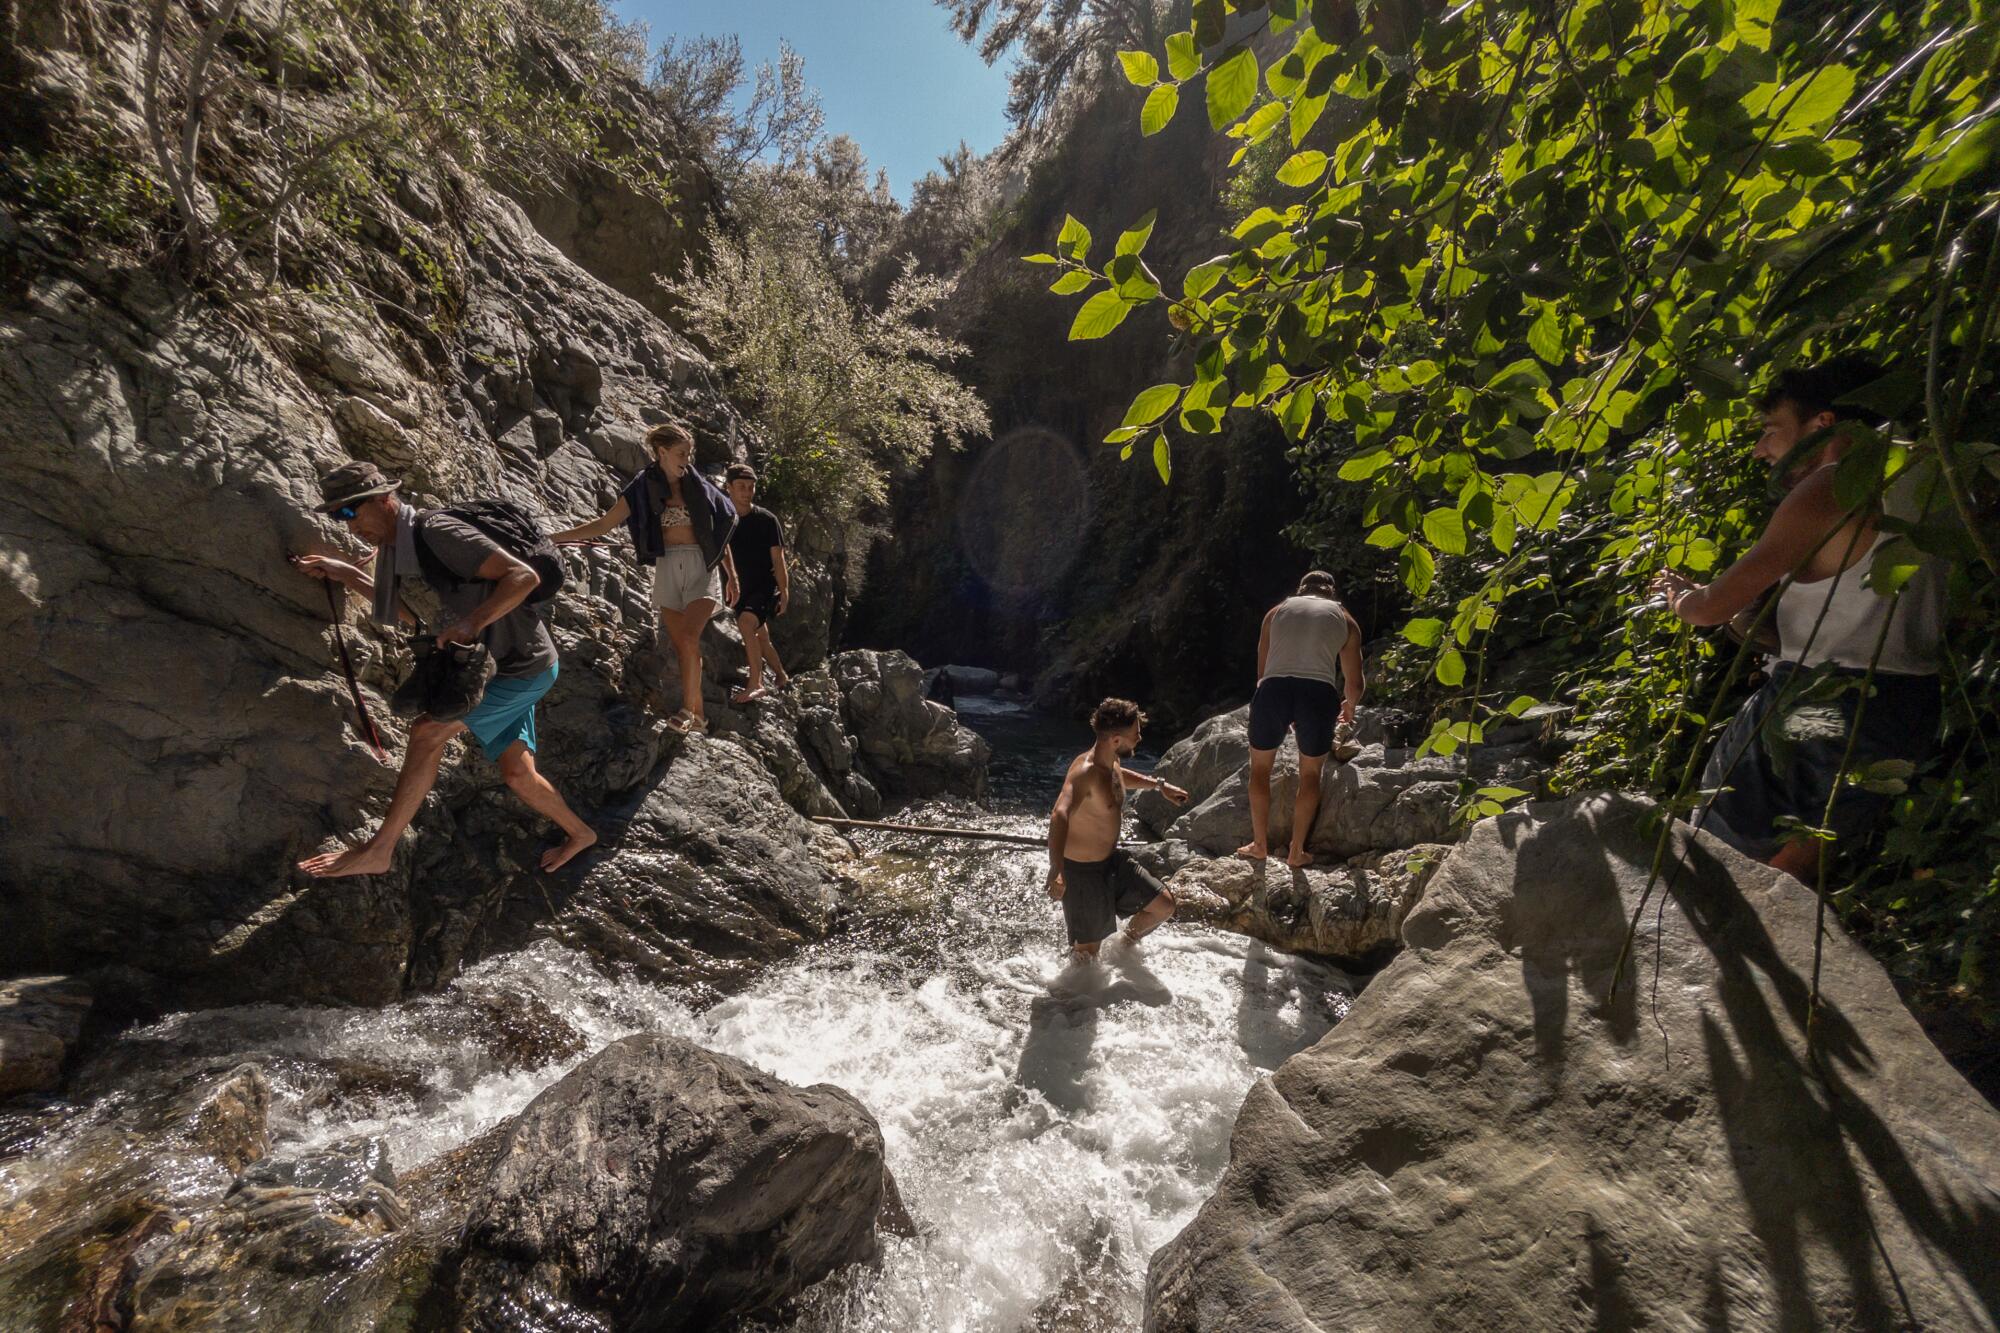 Visitors use rope guides to negotiate a section at Stoddard Canyon Falls and Slide in Mt. Baldy.